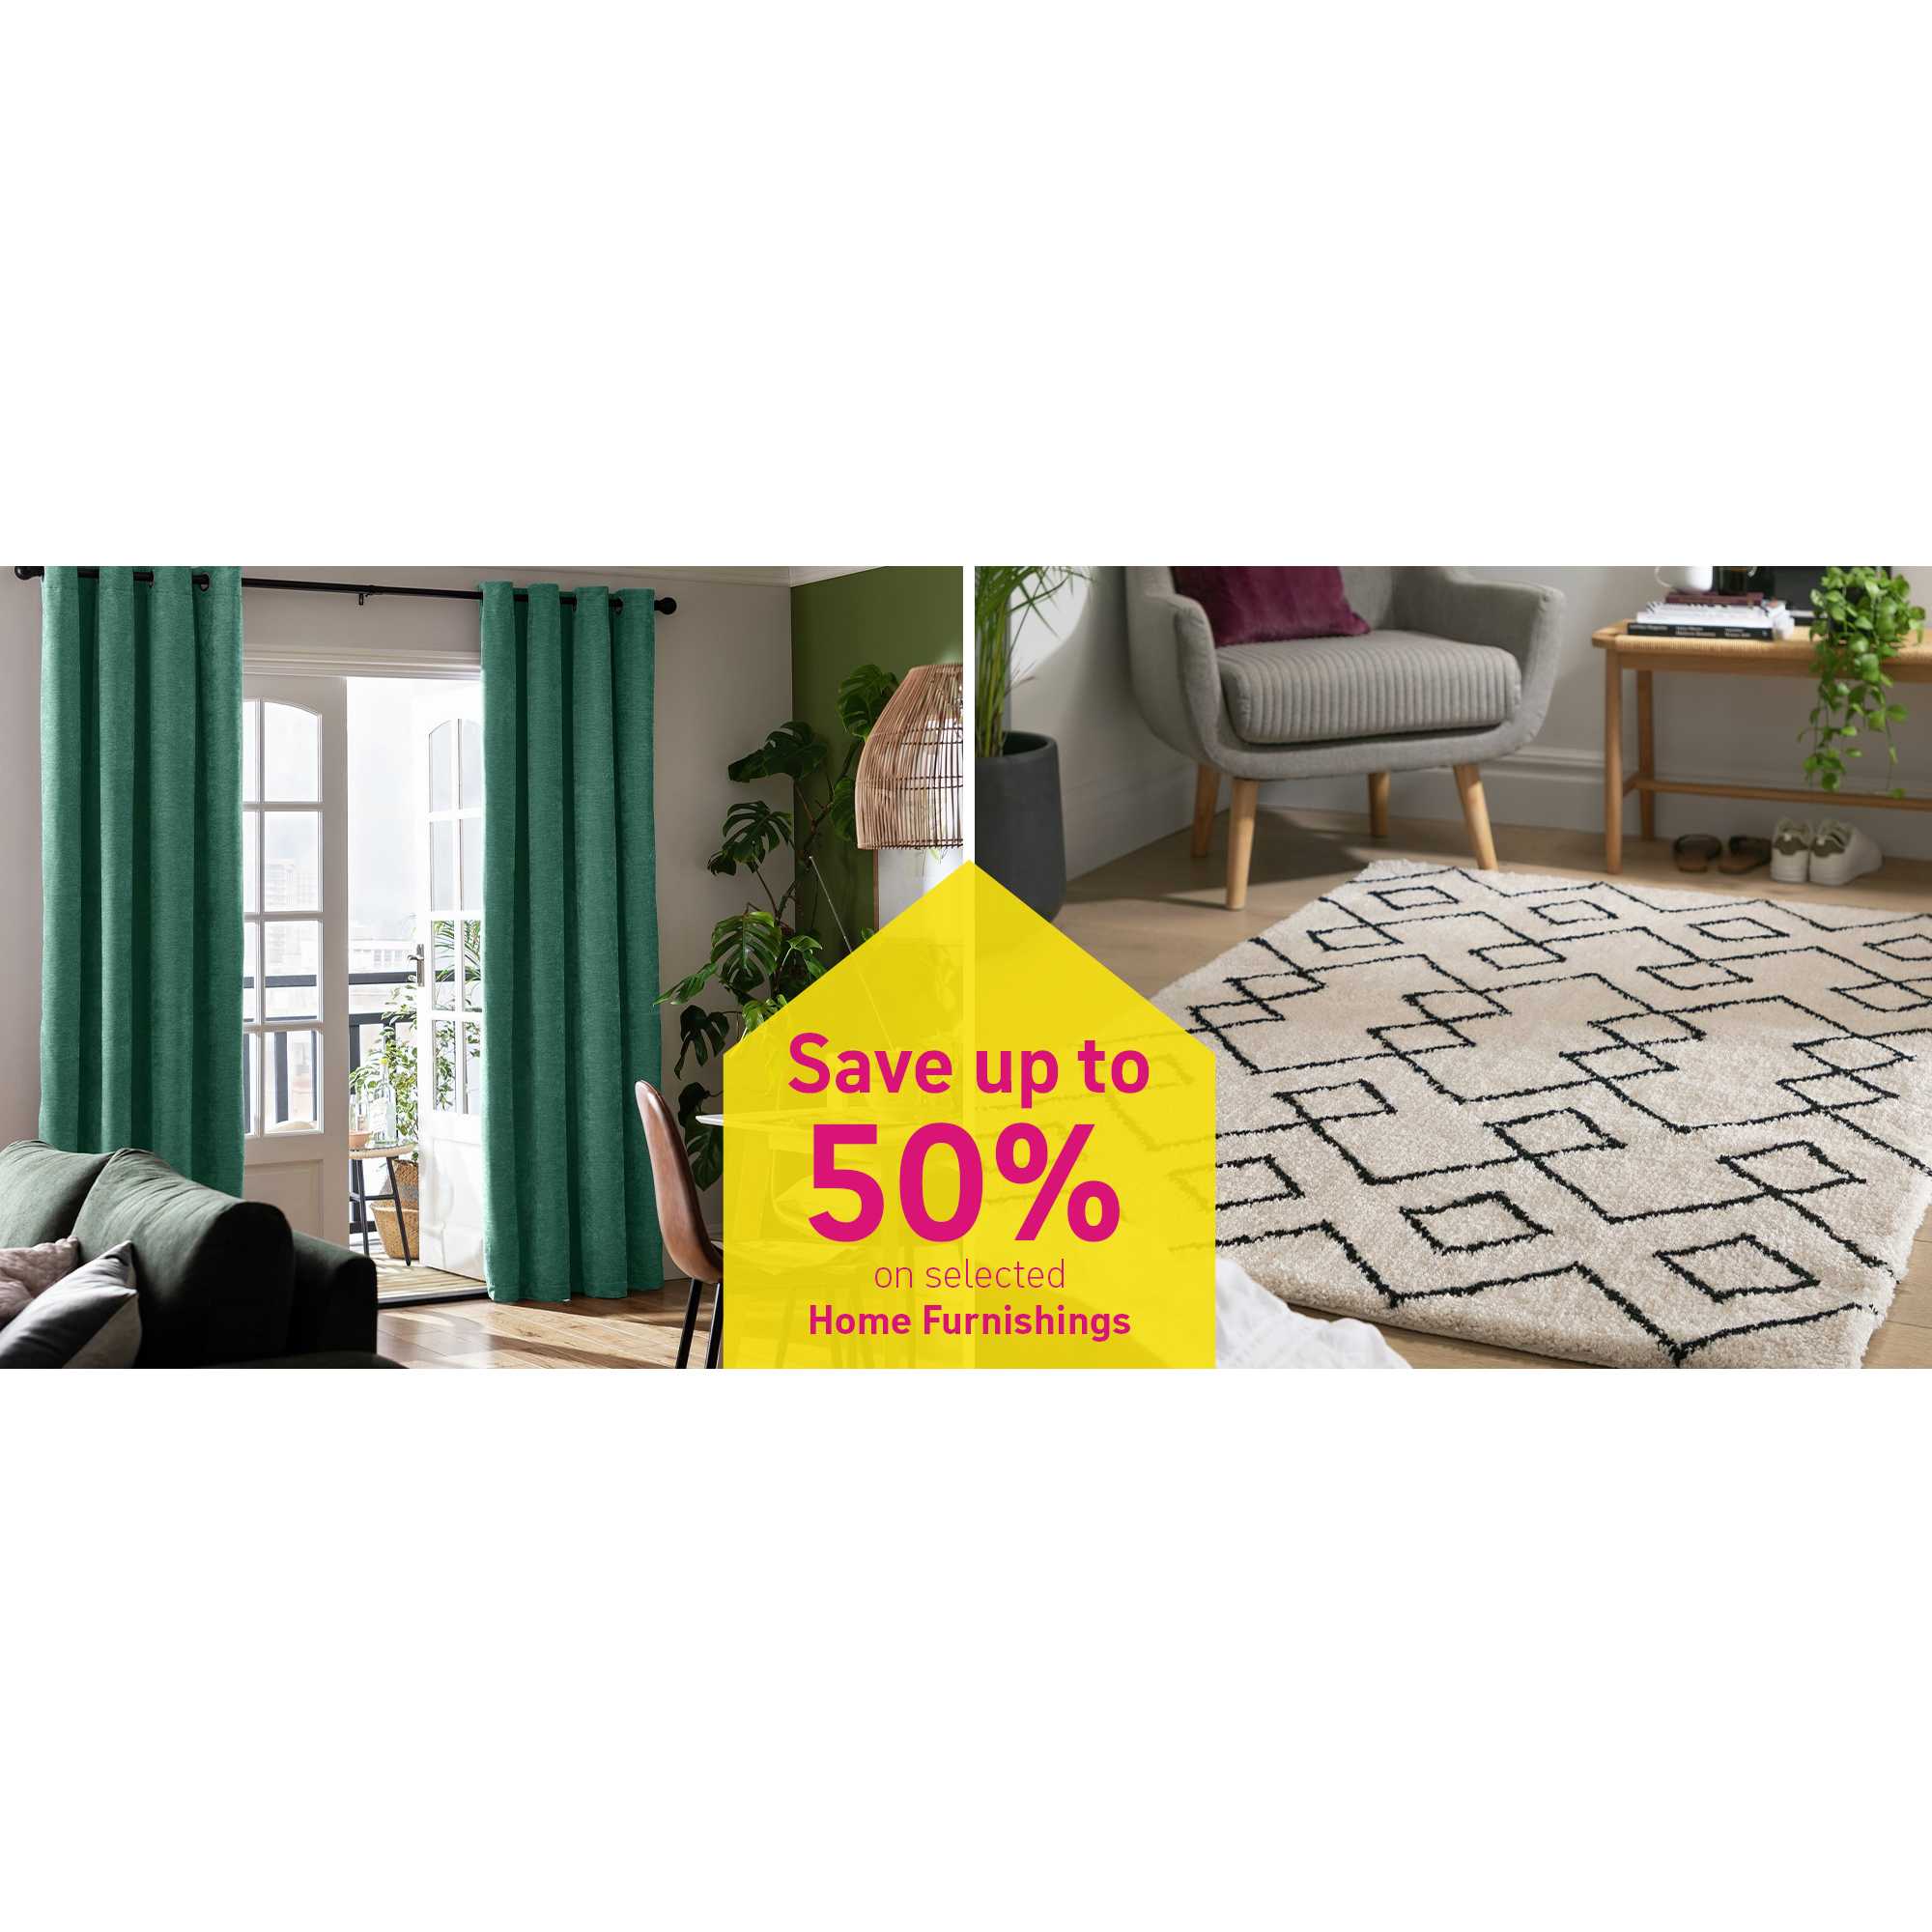 Save up to 50% on selected Home furnishings.